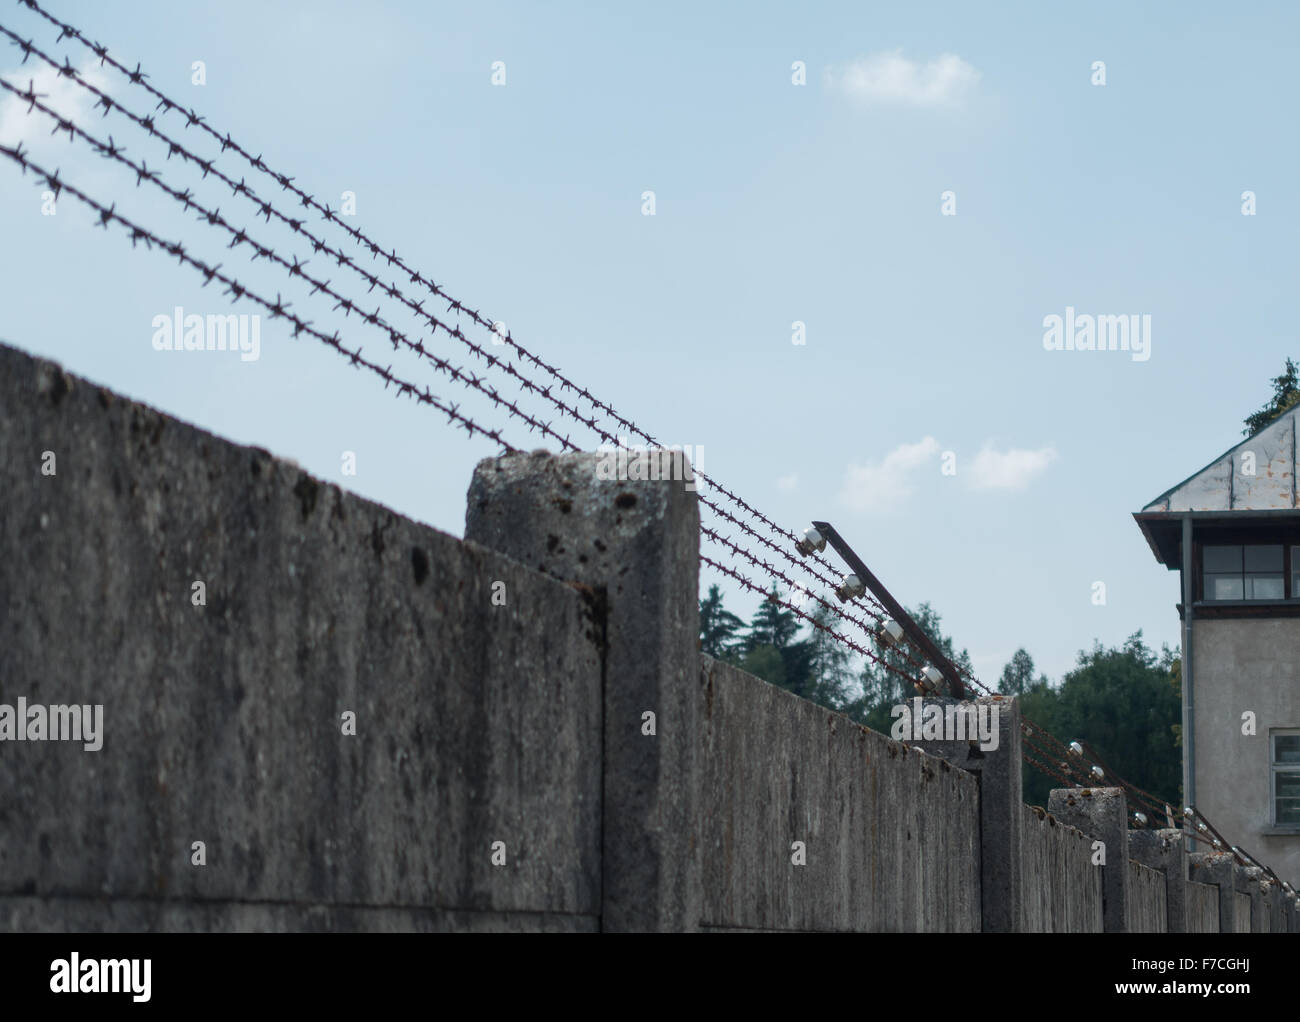 Barbed wire fence at the former Dachau concentration camp near Munich, Germany. The site is now a memorial and a museum. Stock Photo